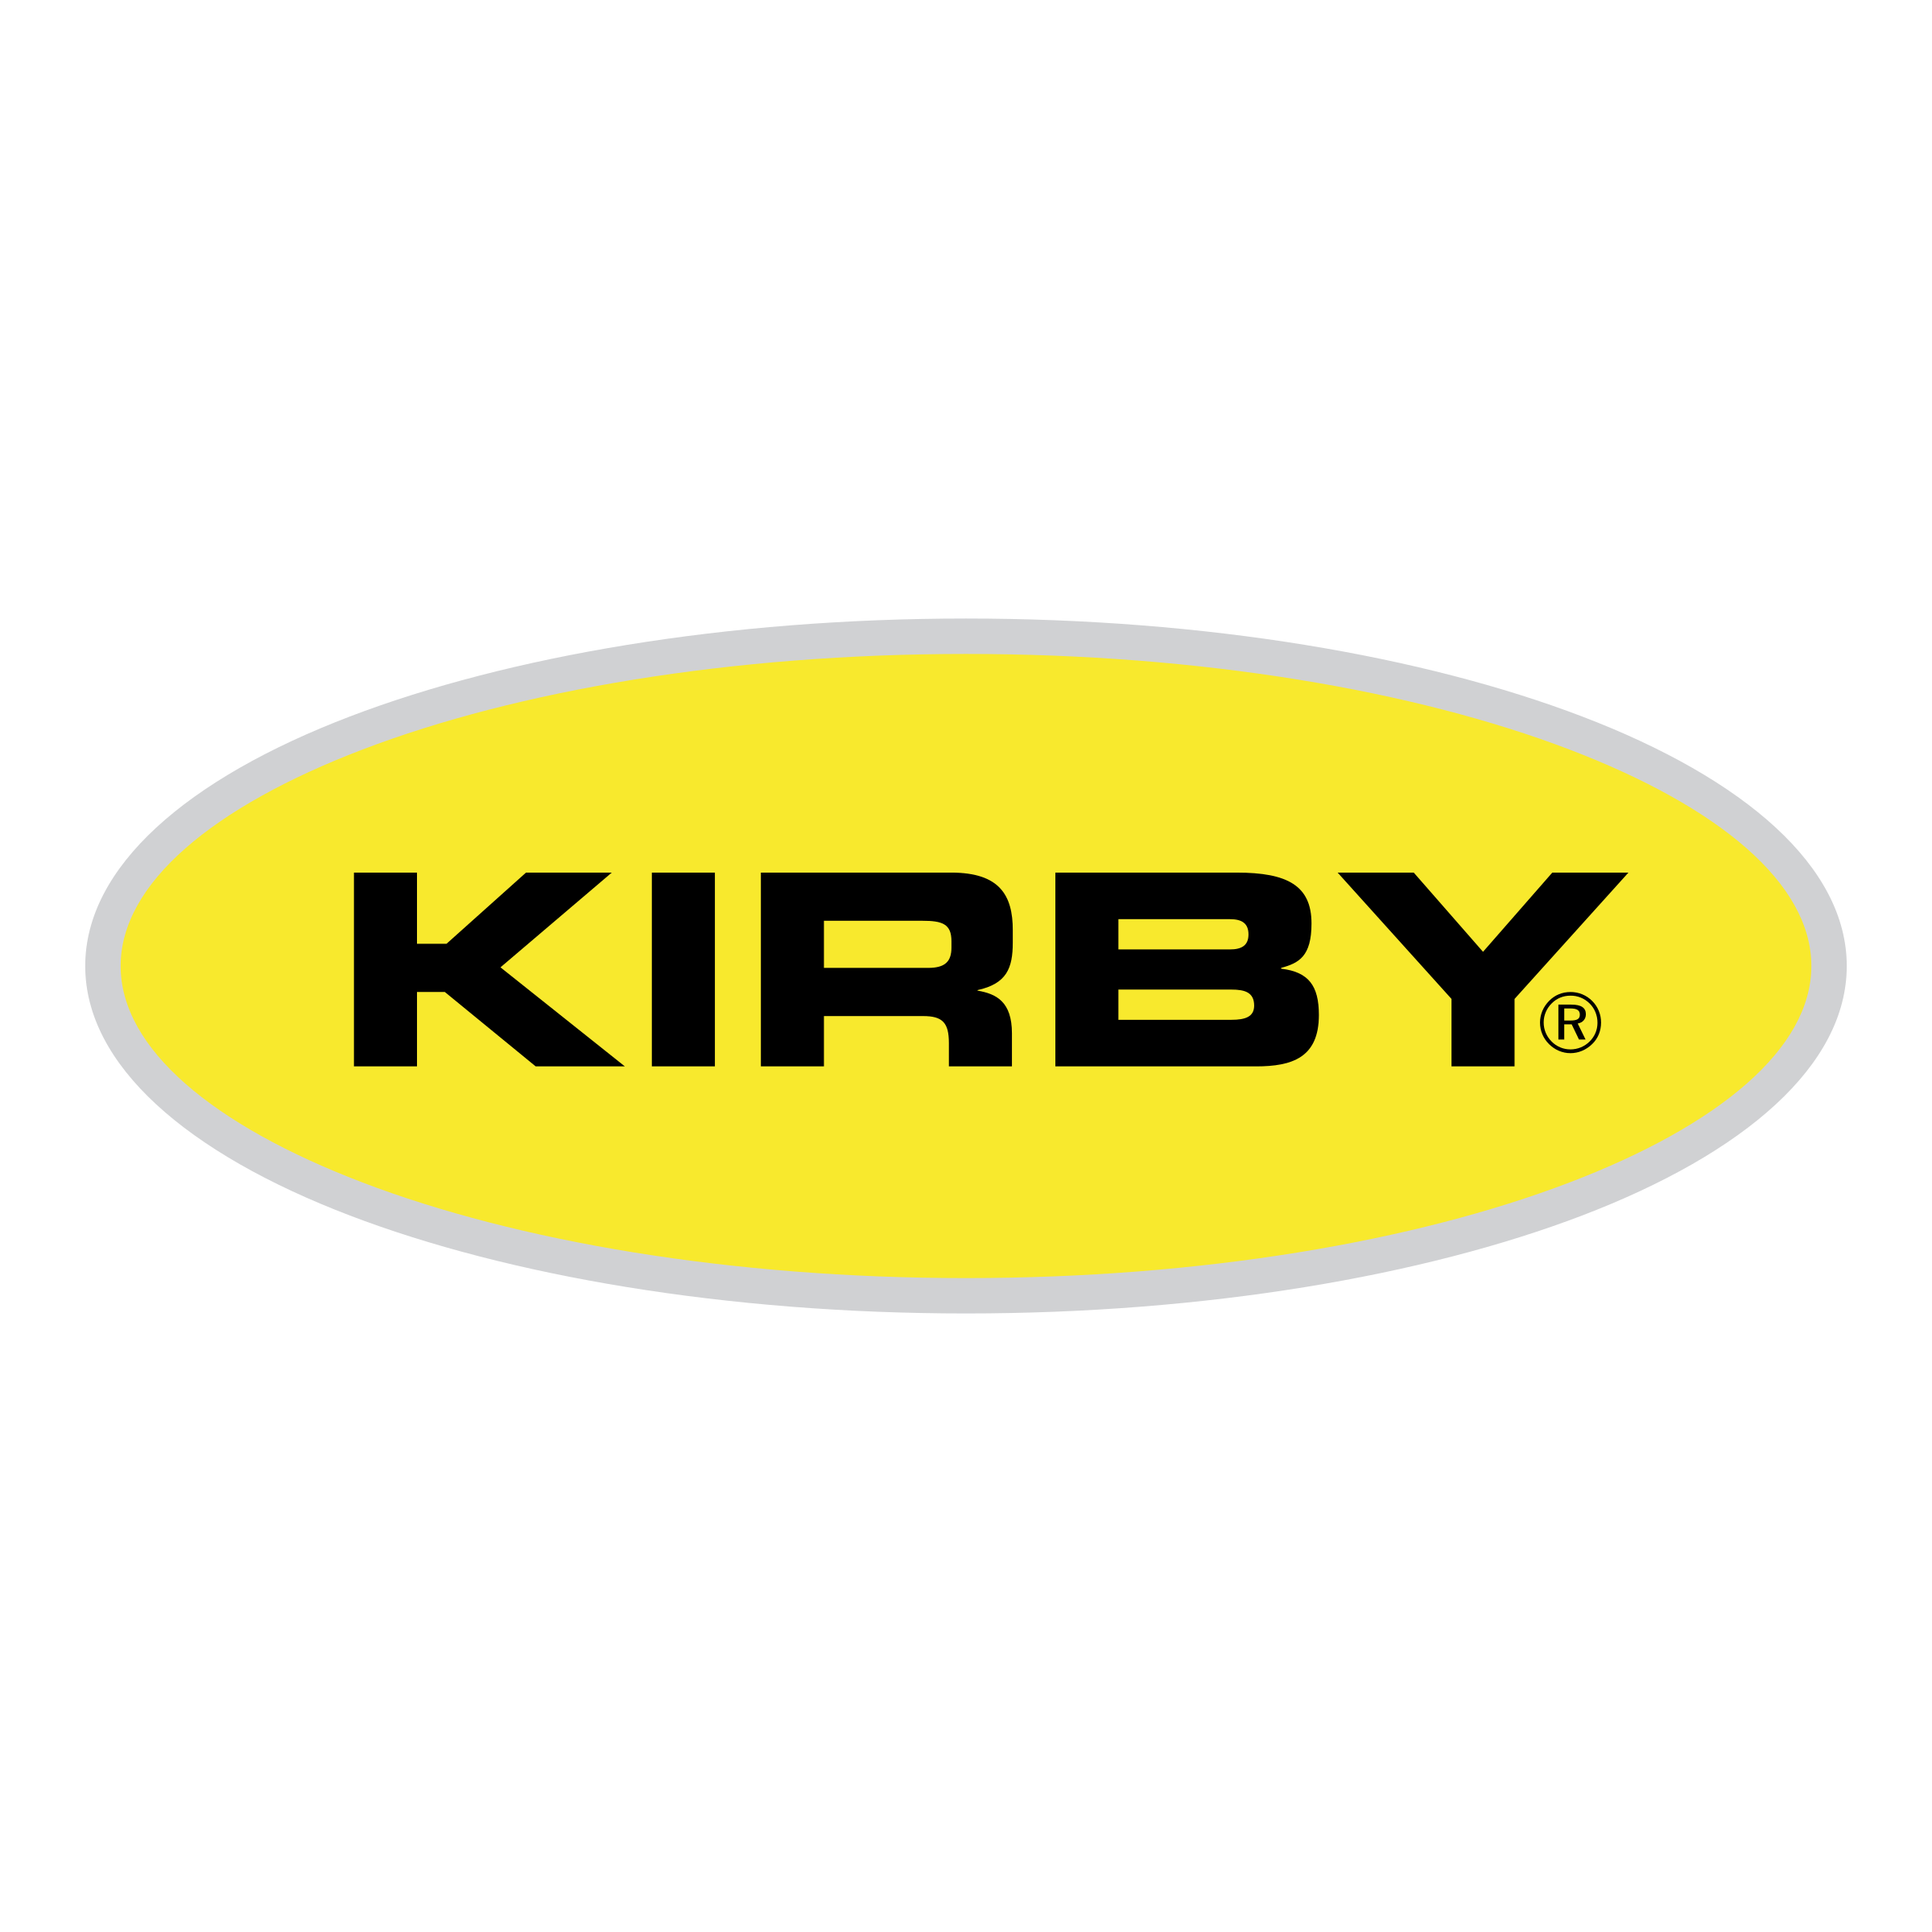 Kirby Logo - Kirby Logo PNG Transparent & SVG Vector